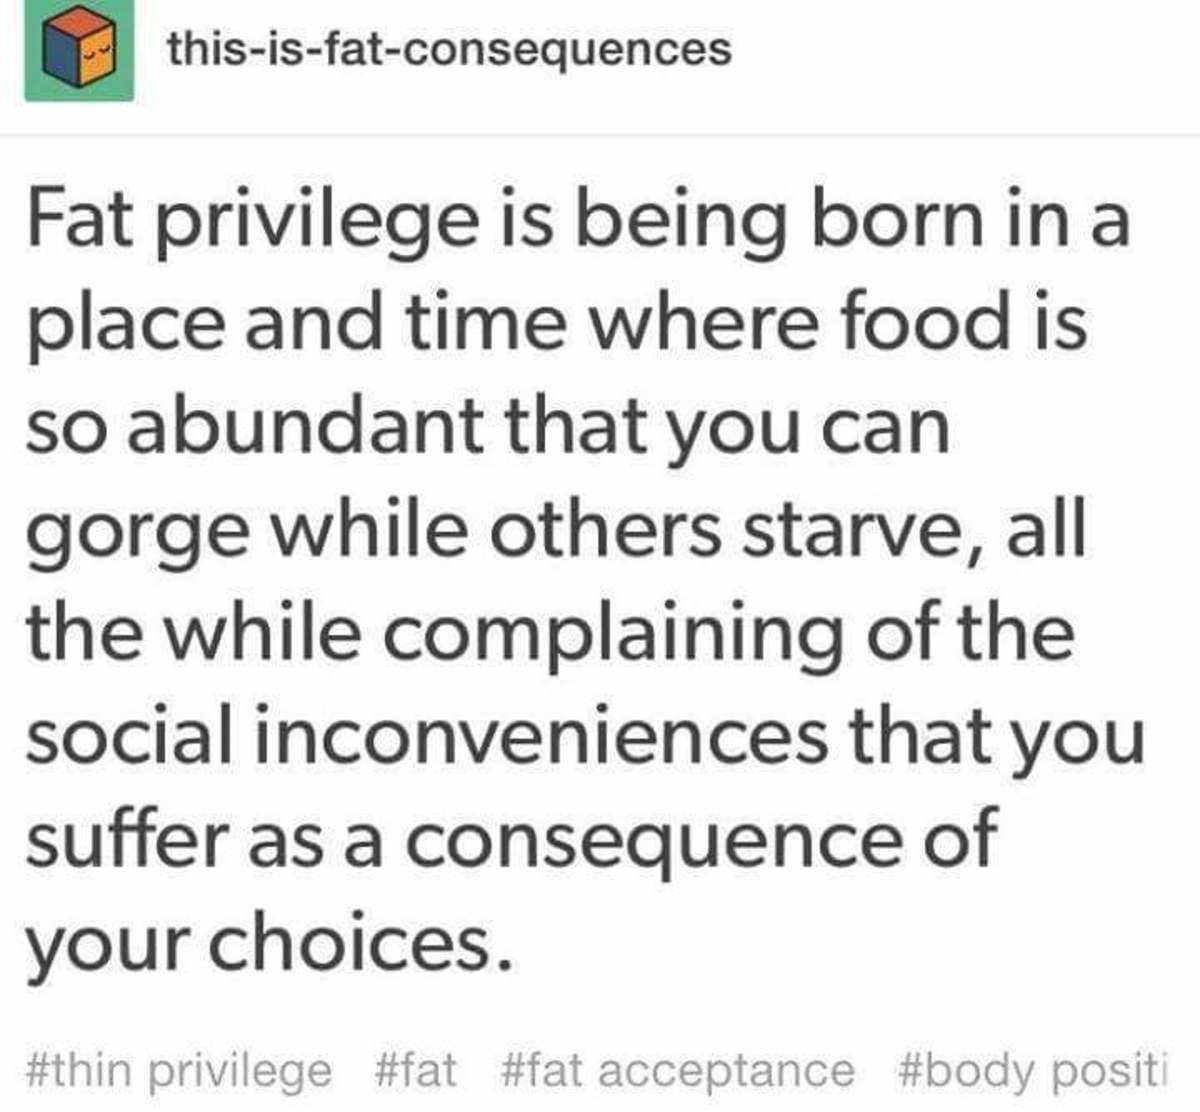 Hurtful truth. . Fiat privilege is being born in a place maarud time : is s; o abundant that l/ Olu can gorge while starve, all the while complaining of the soc